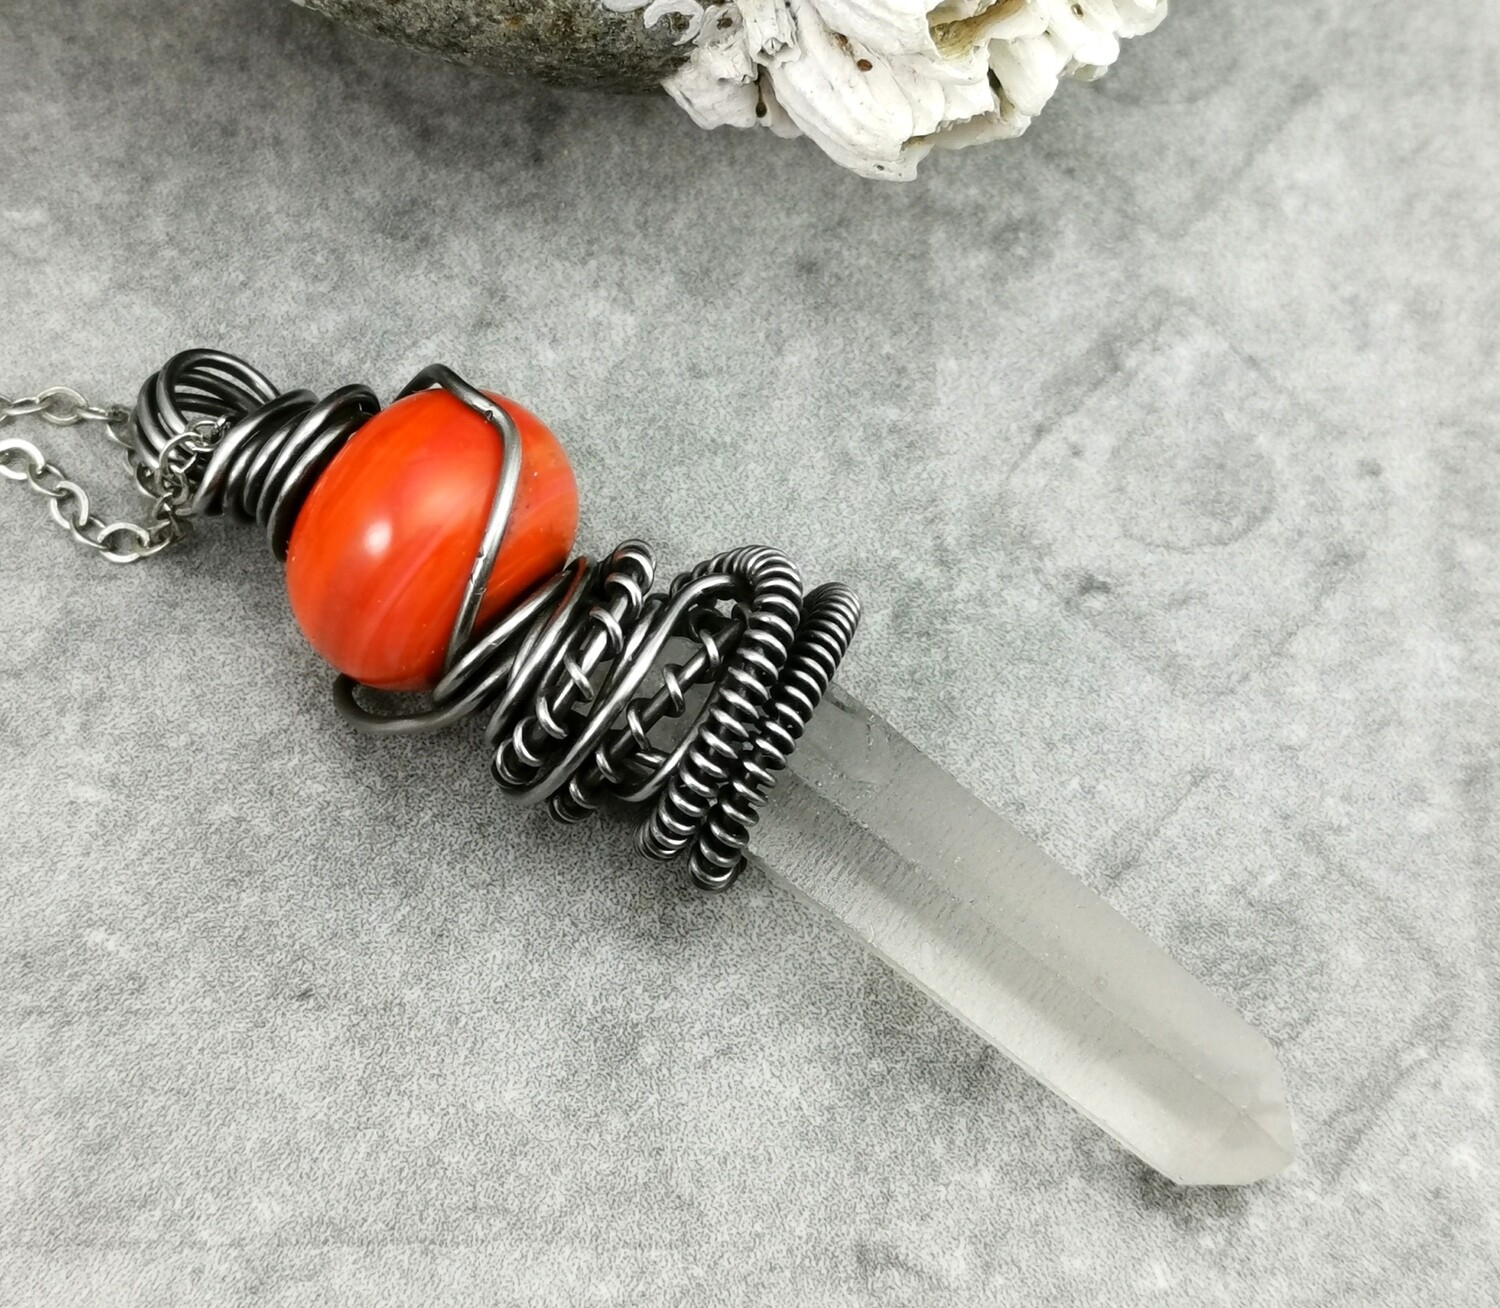 Crystal Healing, Crystal Quartz Points, Quartz Healing Stones, Reiki, Meditation, Lampwork, Crystal Pendant, Steel Wire Wrapped, Steel Wire, Pendant, Necklace, Gifts for Her, One of a Kind